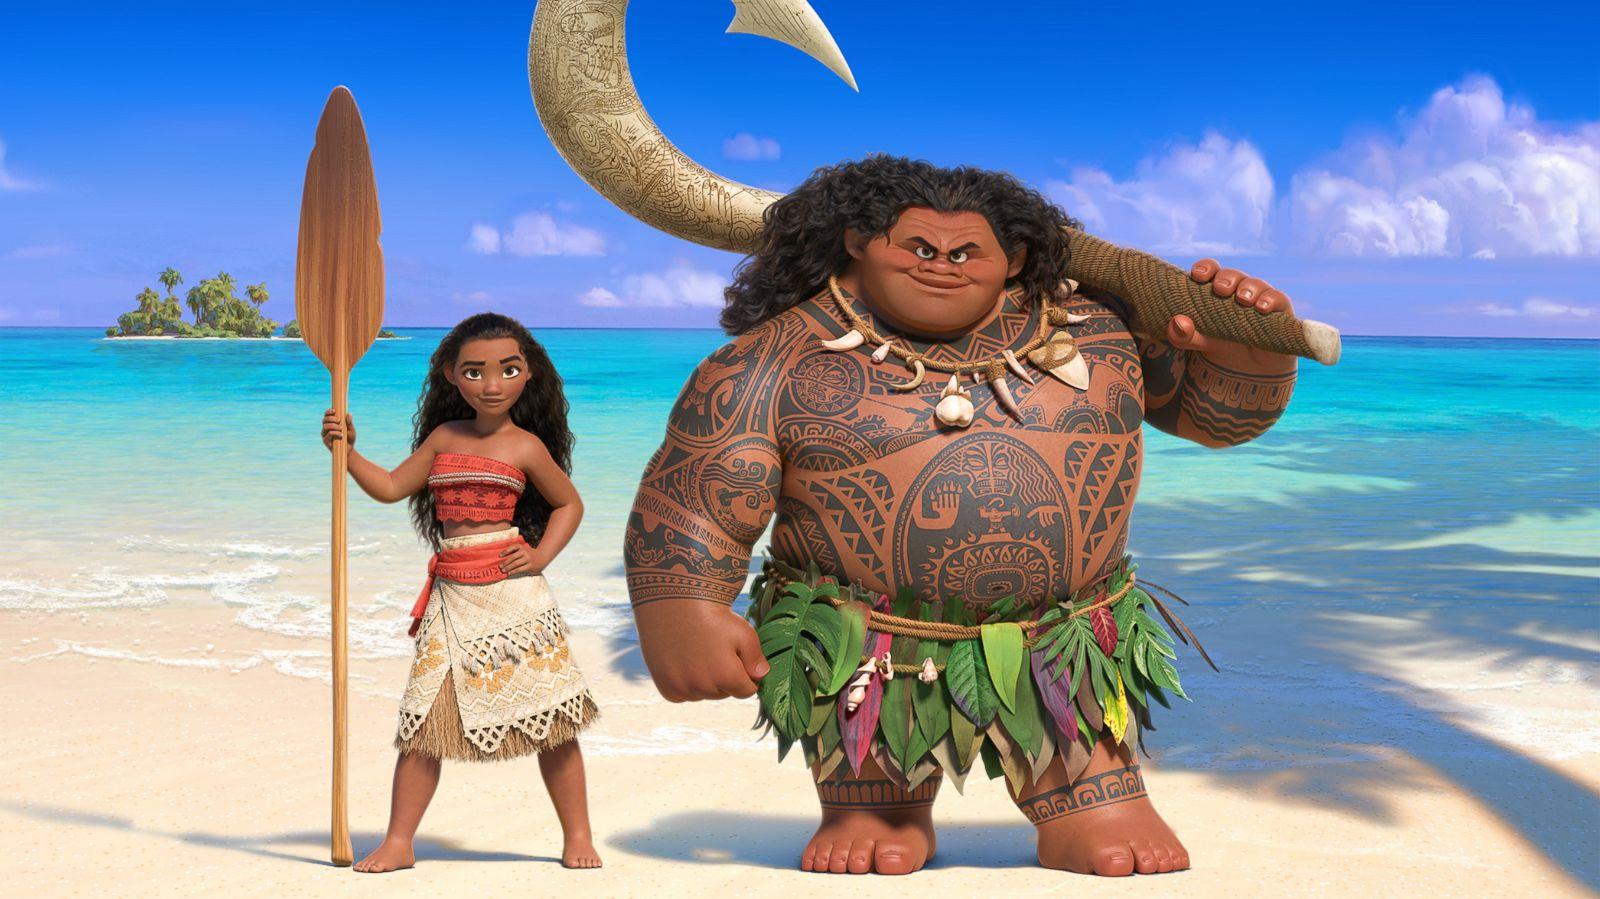  Things to Know About Disneys Moana Before You See It ABC News